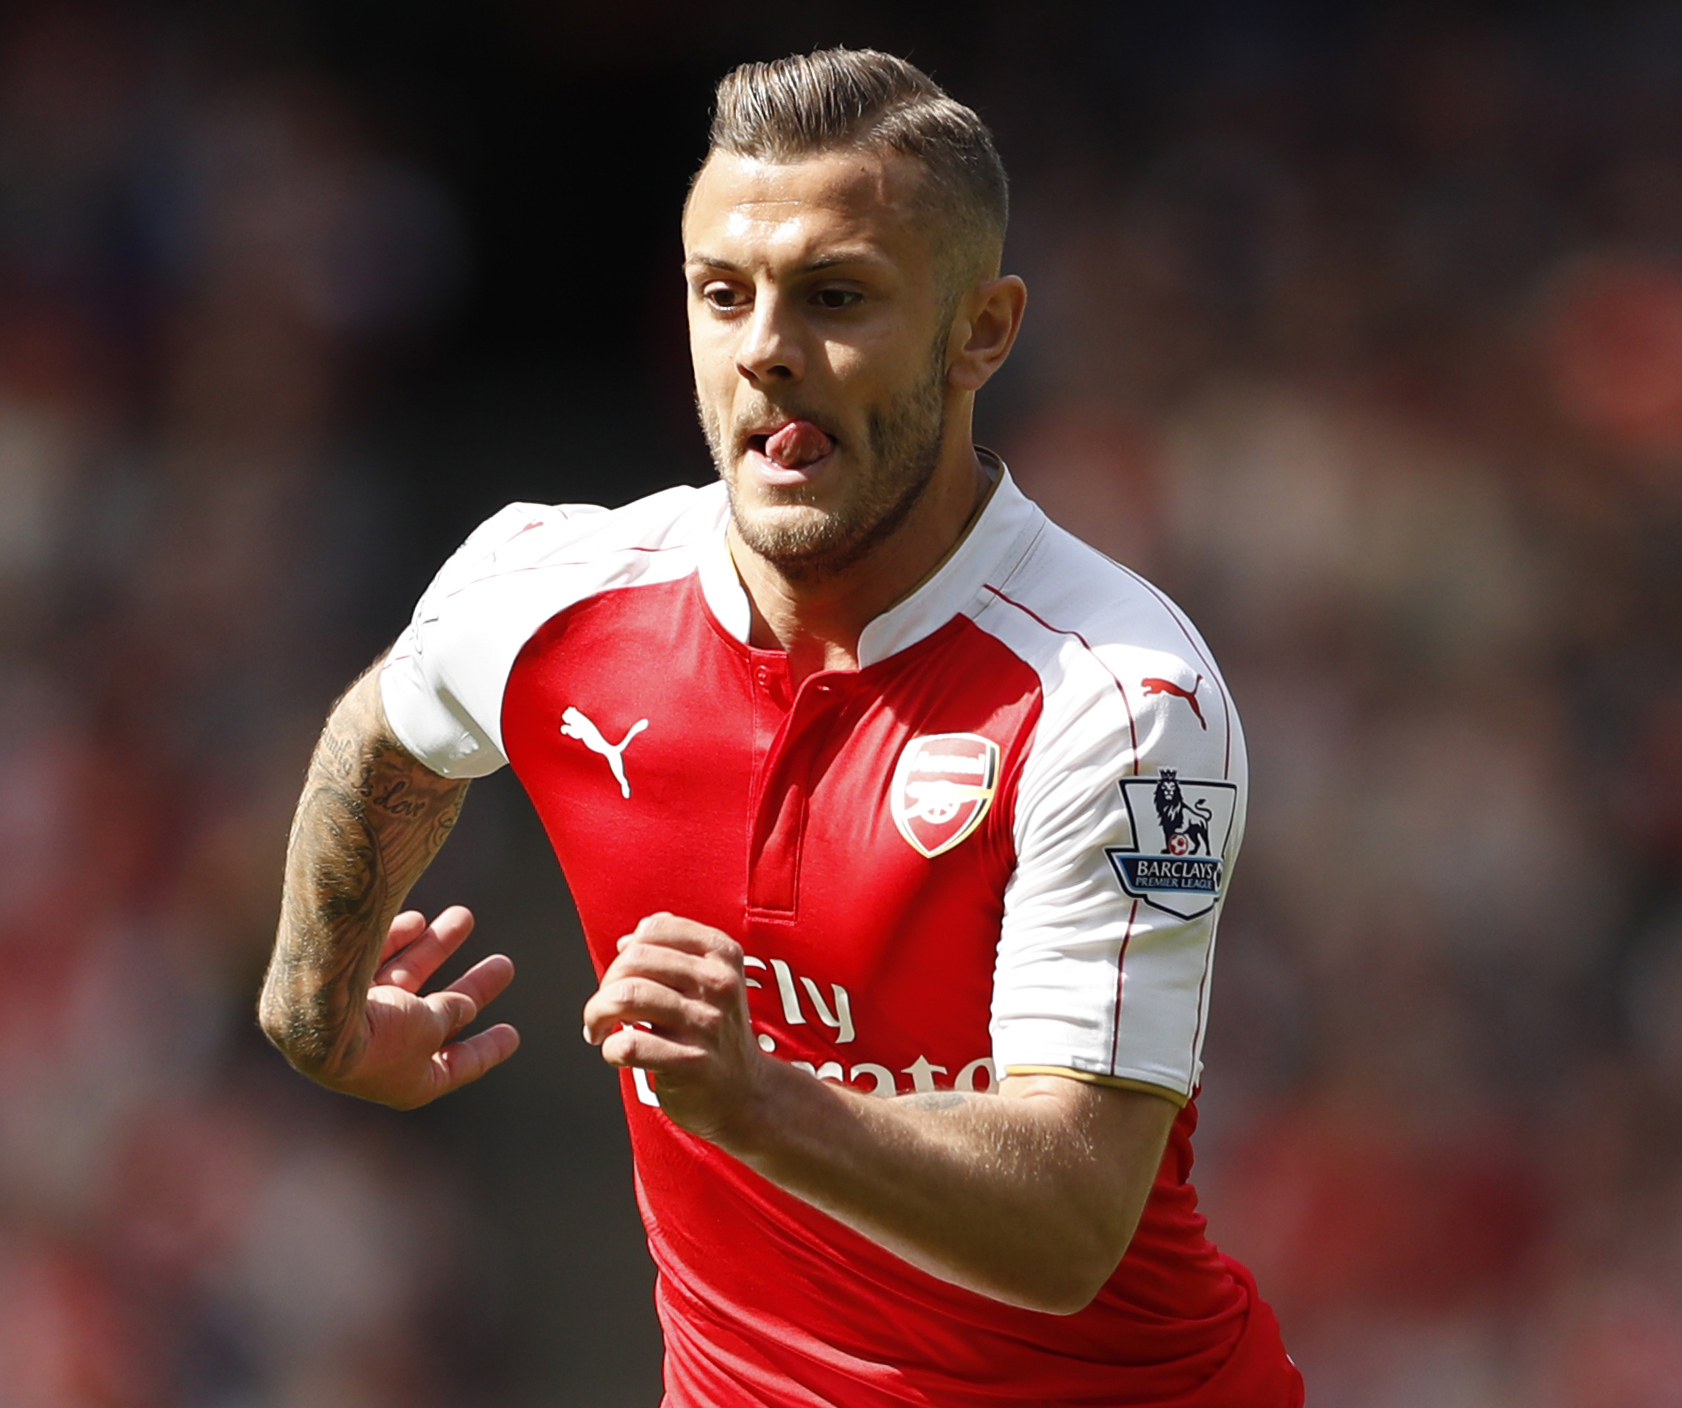 Wilshere fit and ready for England at Euros, says Wenger